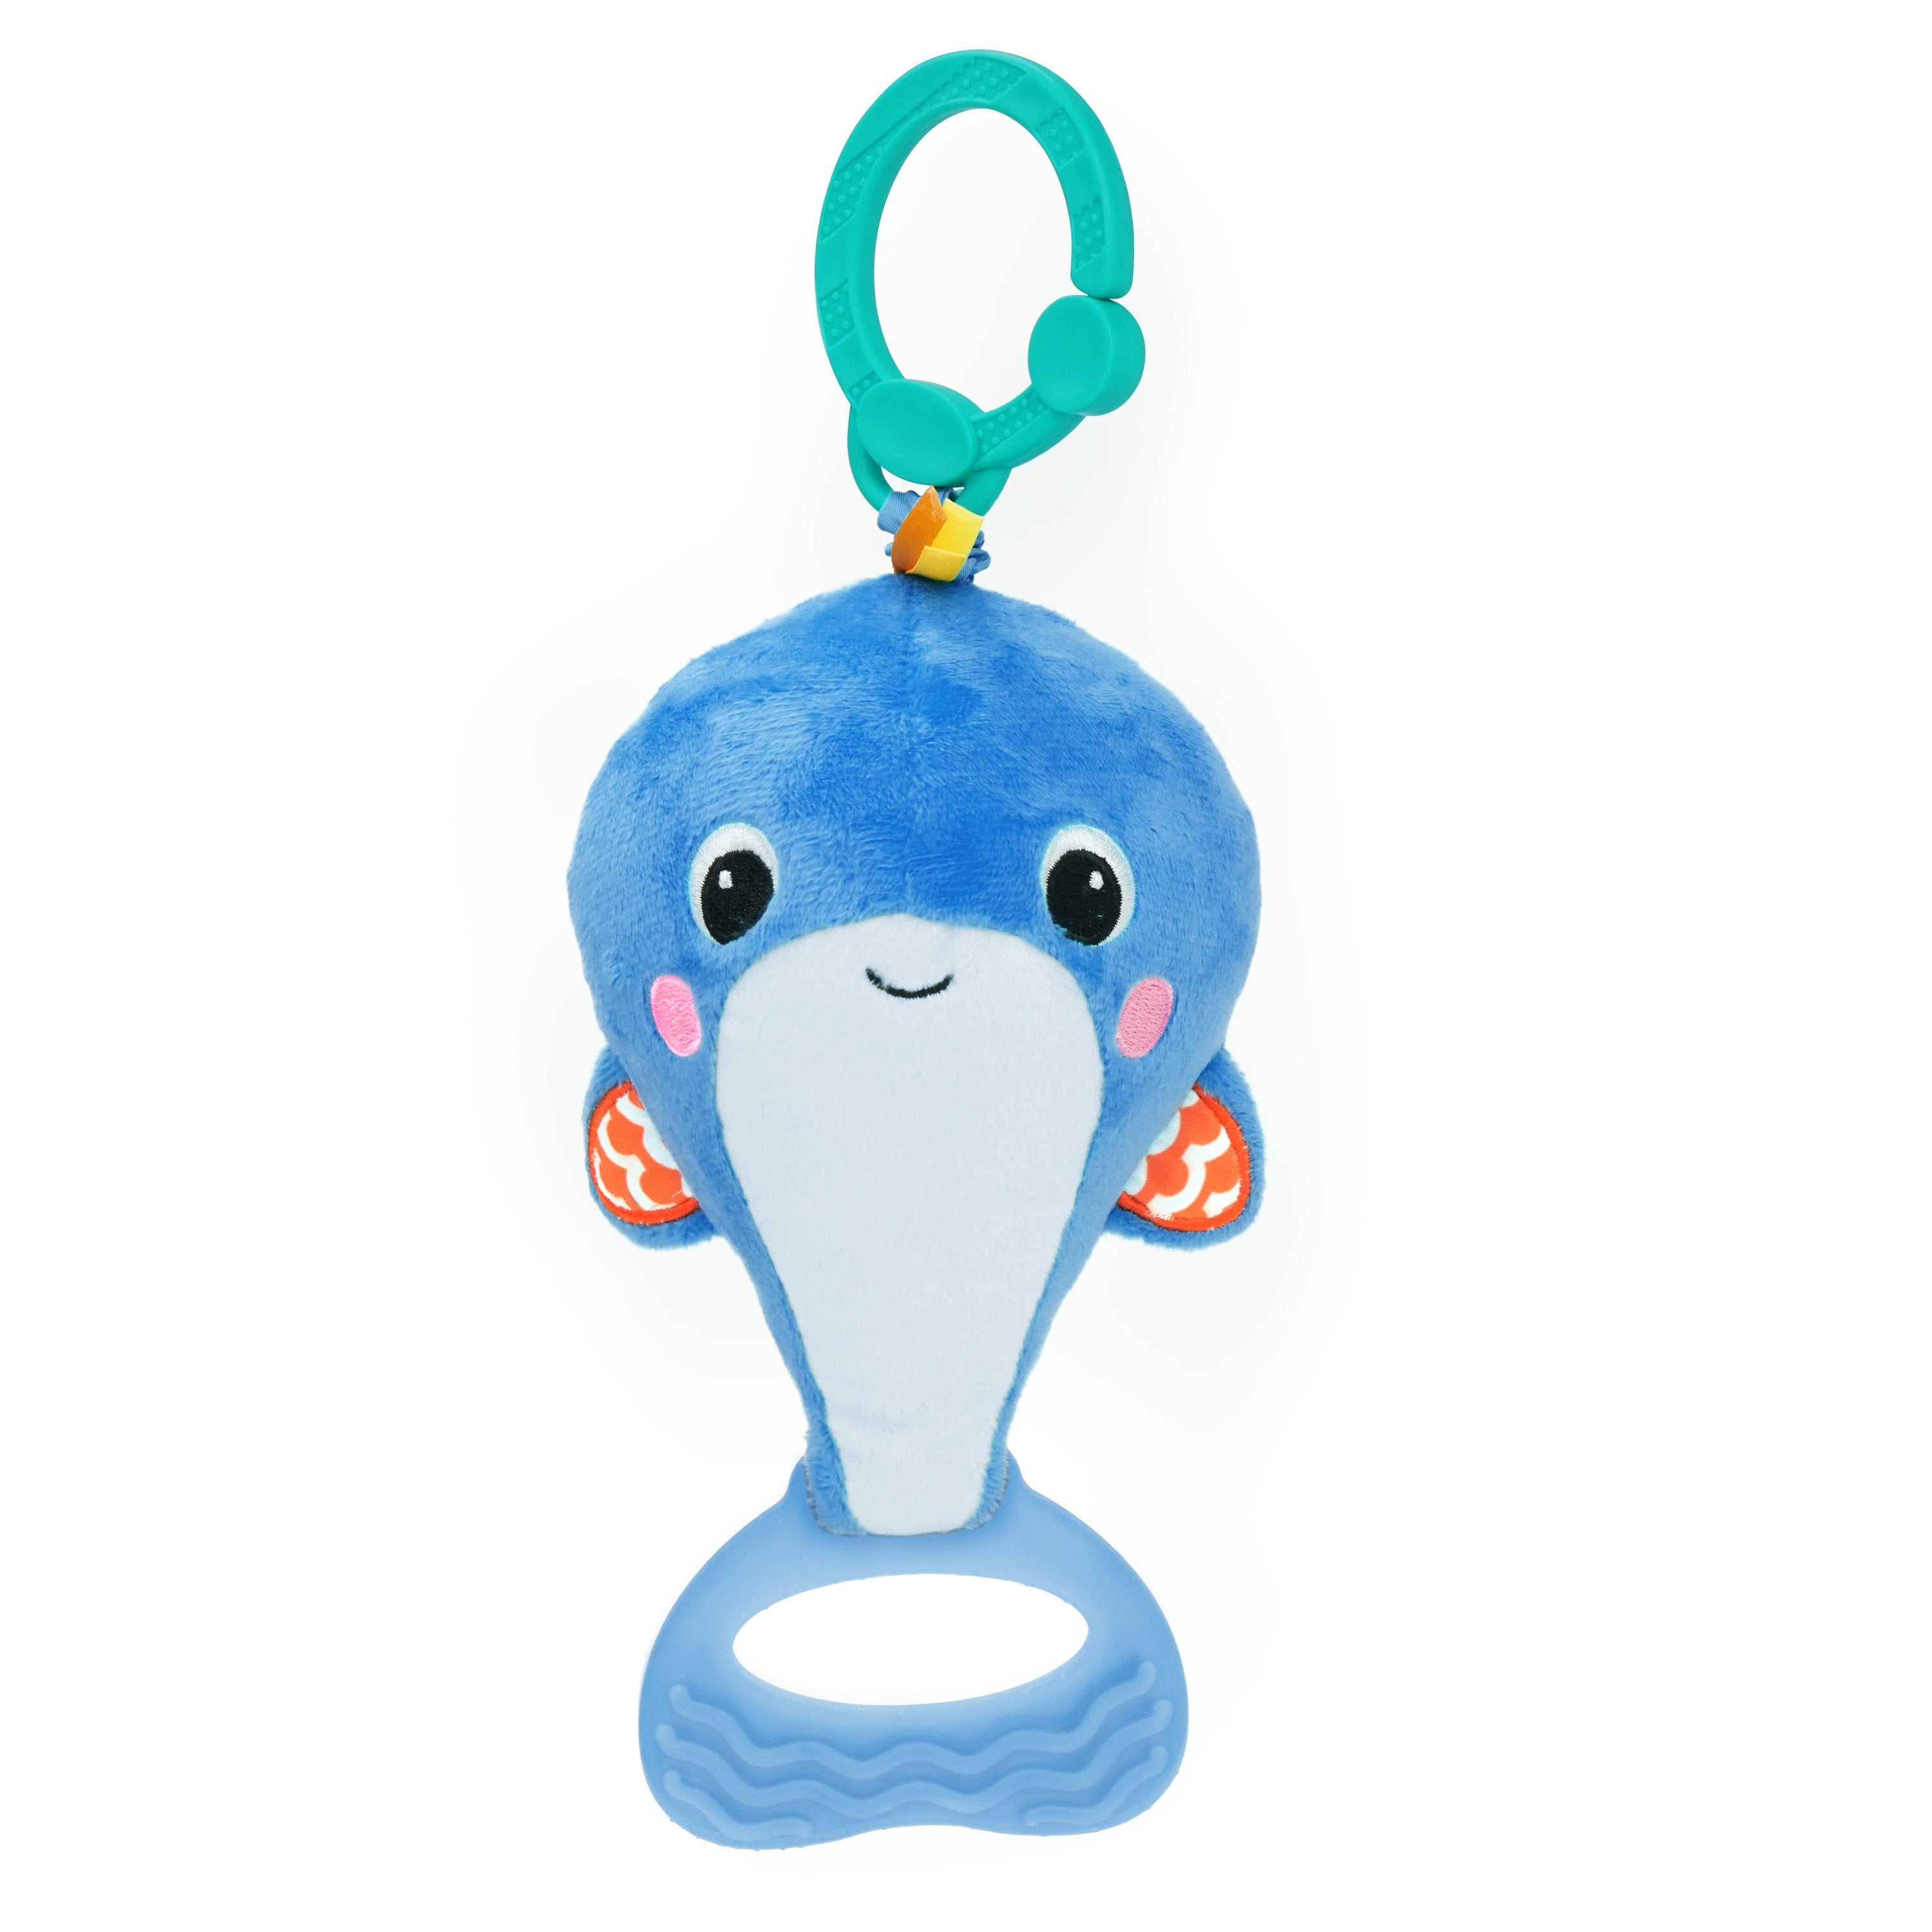 Bright Starts Having a Ball Silly Spout Whale Popper